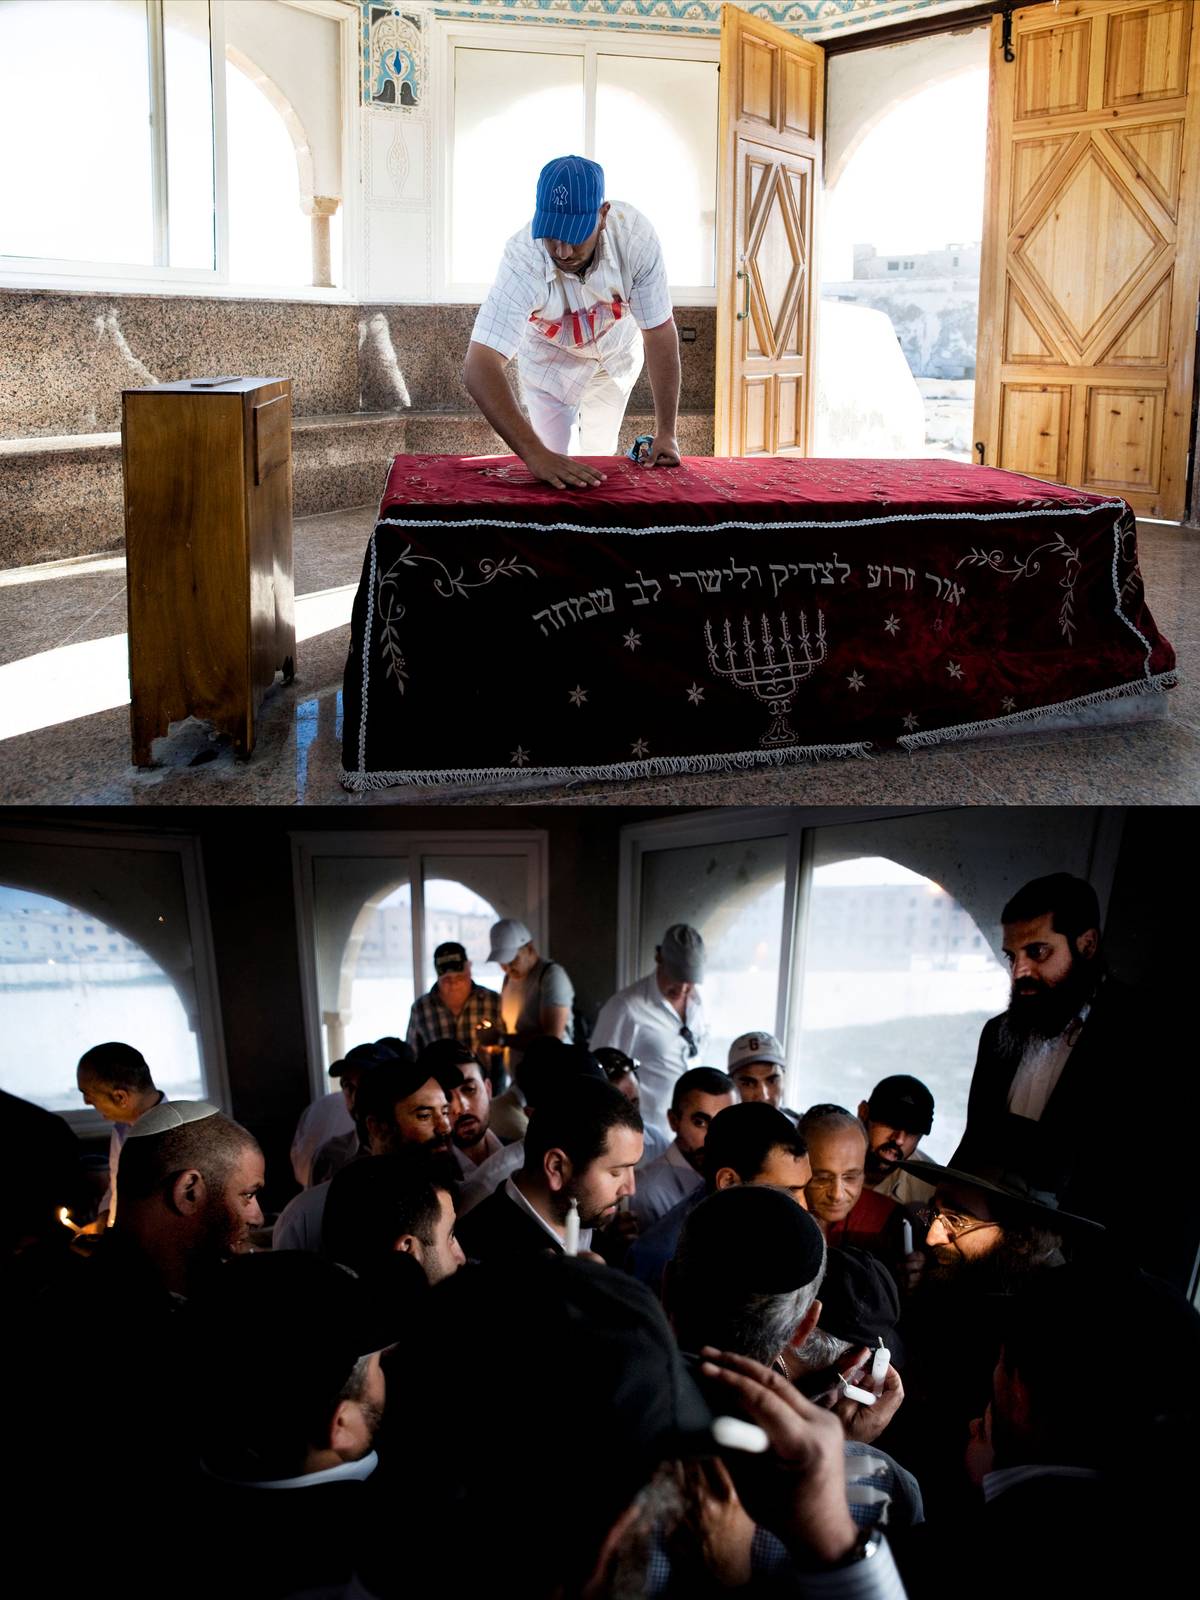 Top photo: Mouhssine Arouche tends to the tomb of the Jewish saint Rabbi Haim Pinto in the 400 year old cemetery of Essaouira. Arouche has been the guardian of the cemetery for 10 years. Before him, his grandfather was the guardian. Bottom photo: Rabbi Youseph Pinto, who lives in Israel, lights the candles of pilgrims visiting the tomb of his grandfather, Rabbi Haim Pinto.